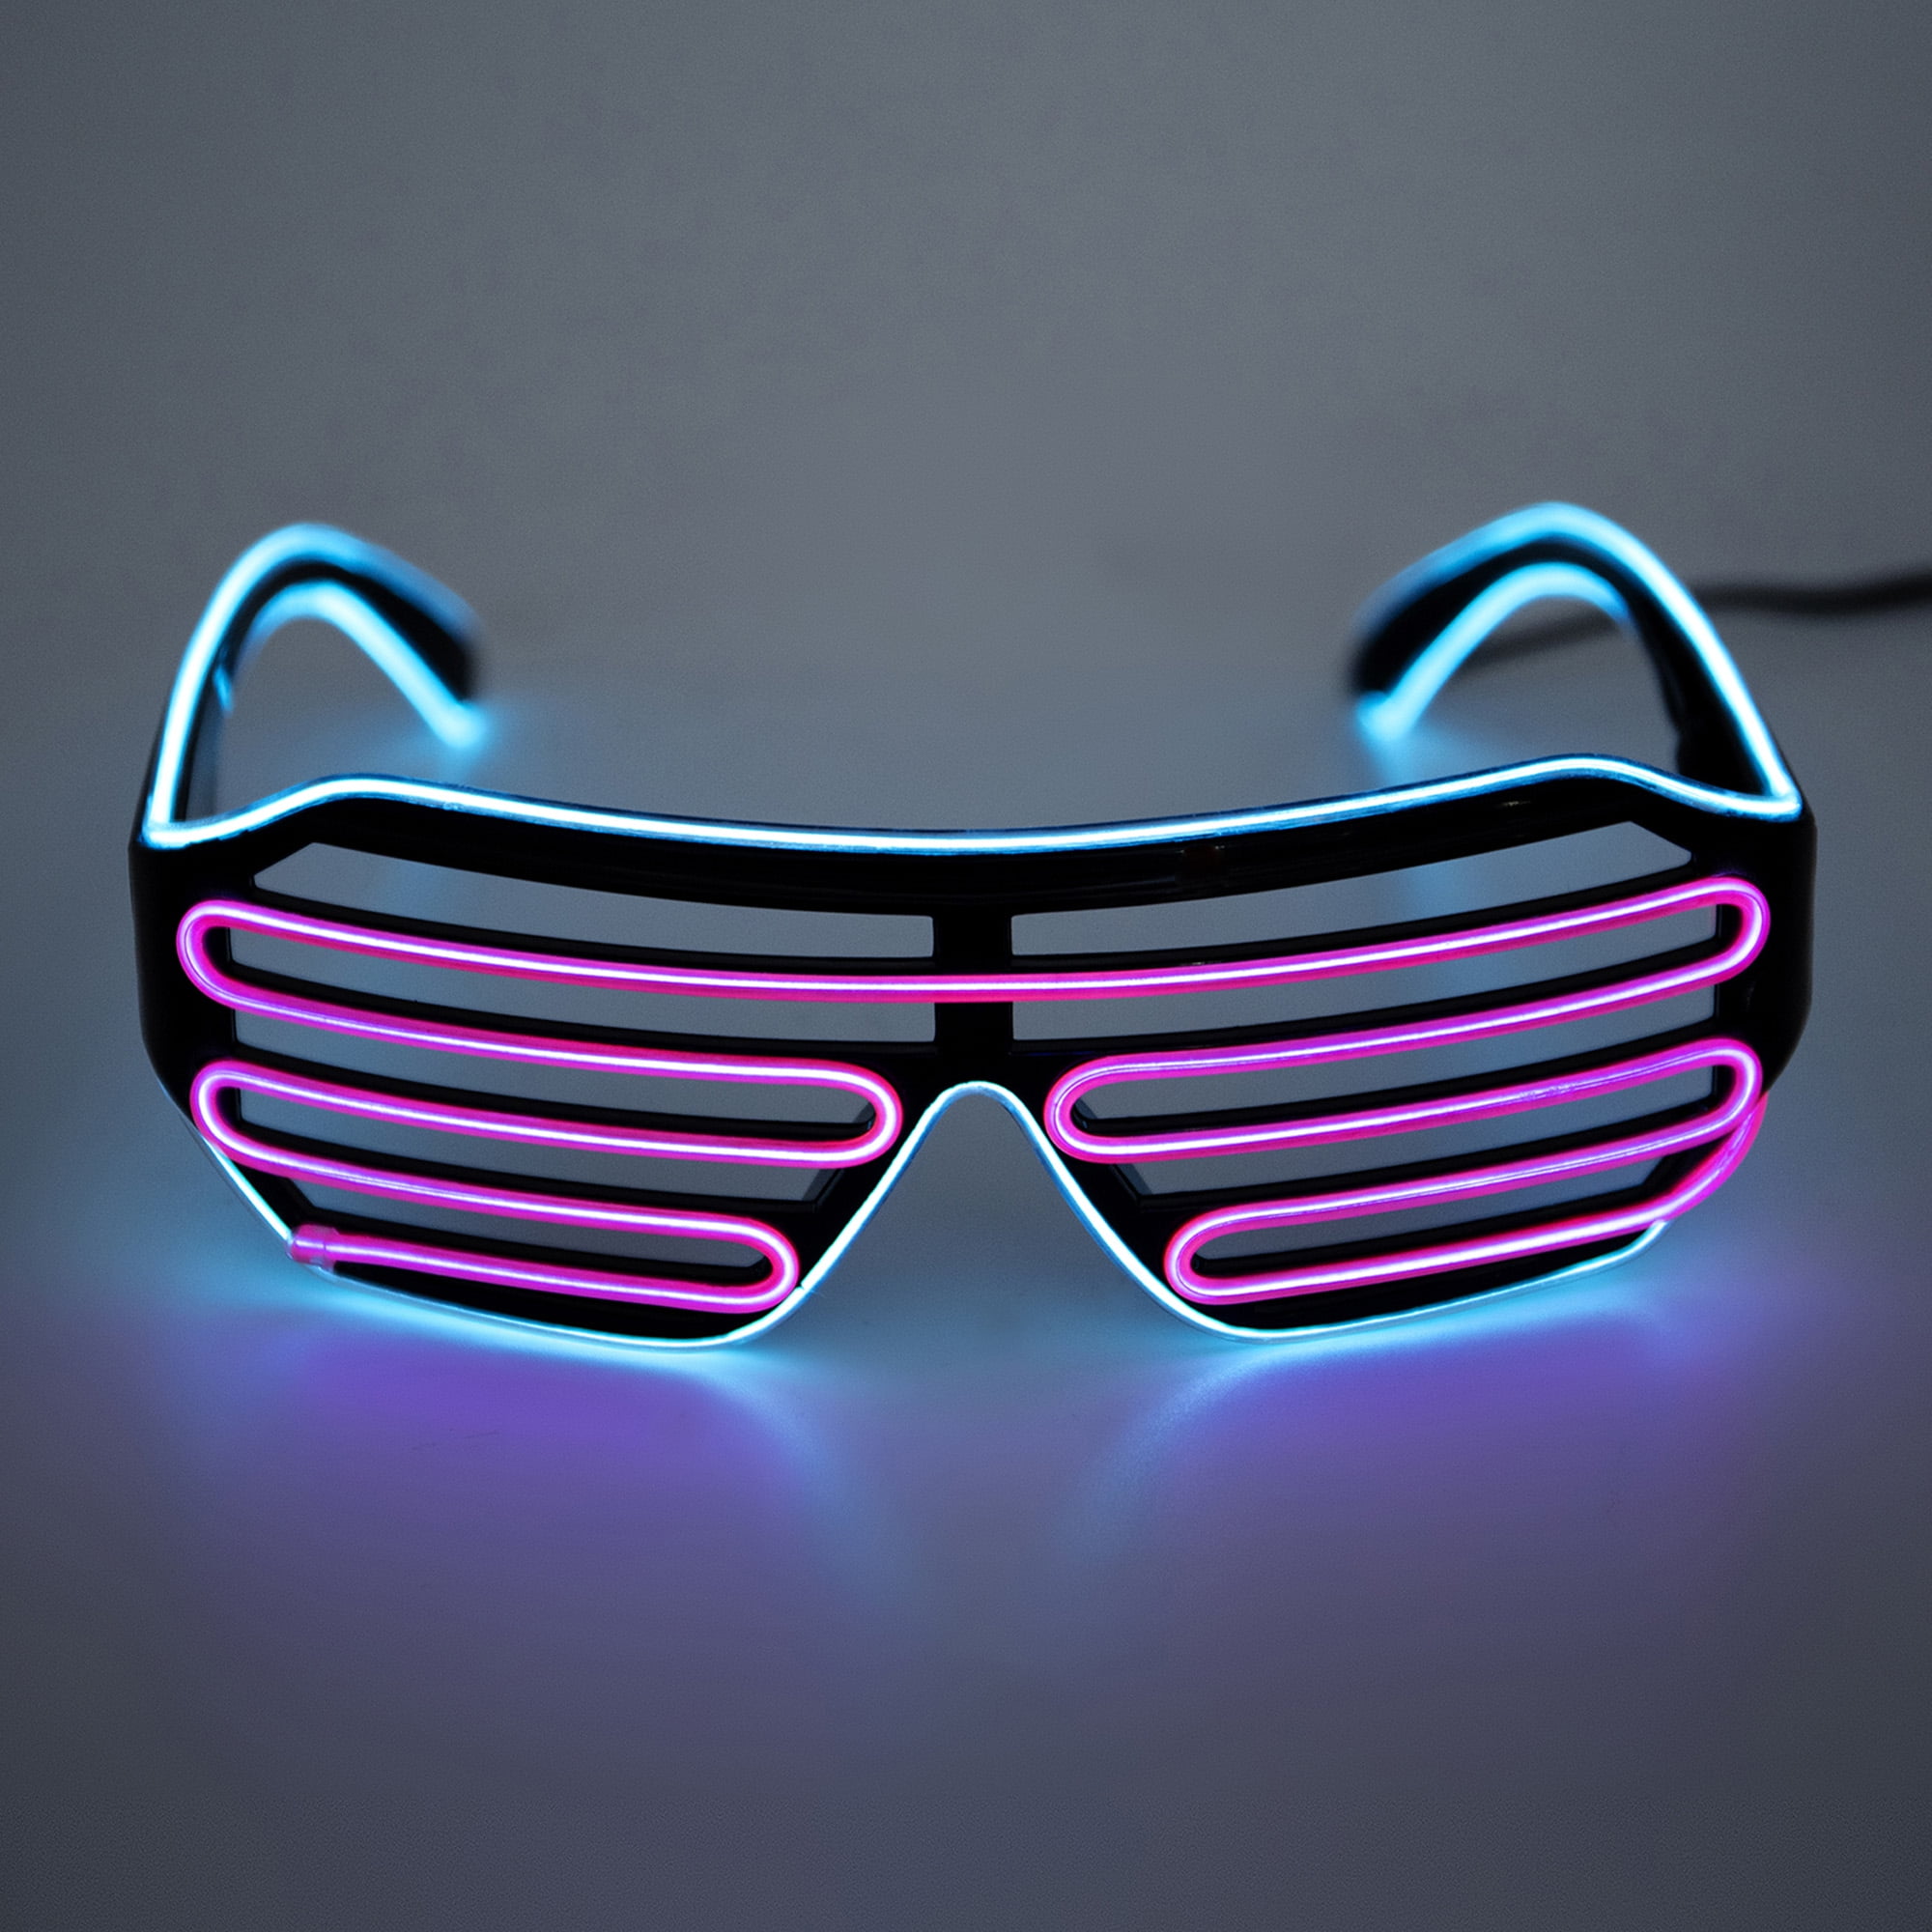 NK HOME Light Up Party Glasses EL Wire Fashion Neon Shutter